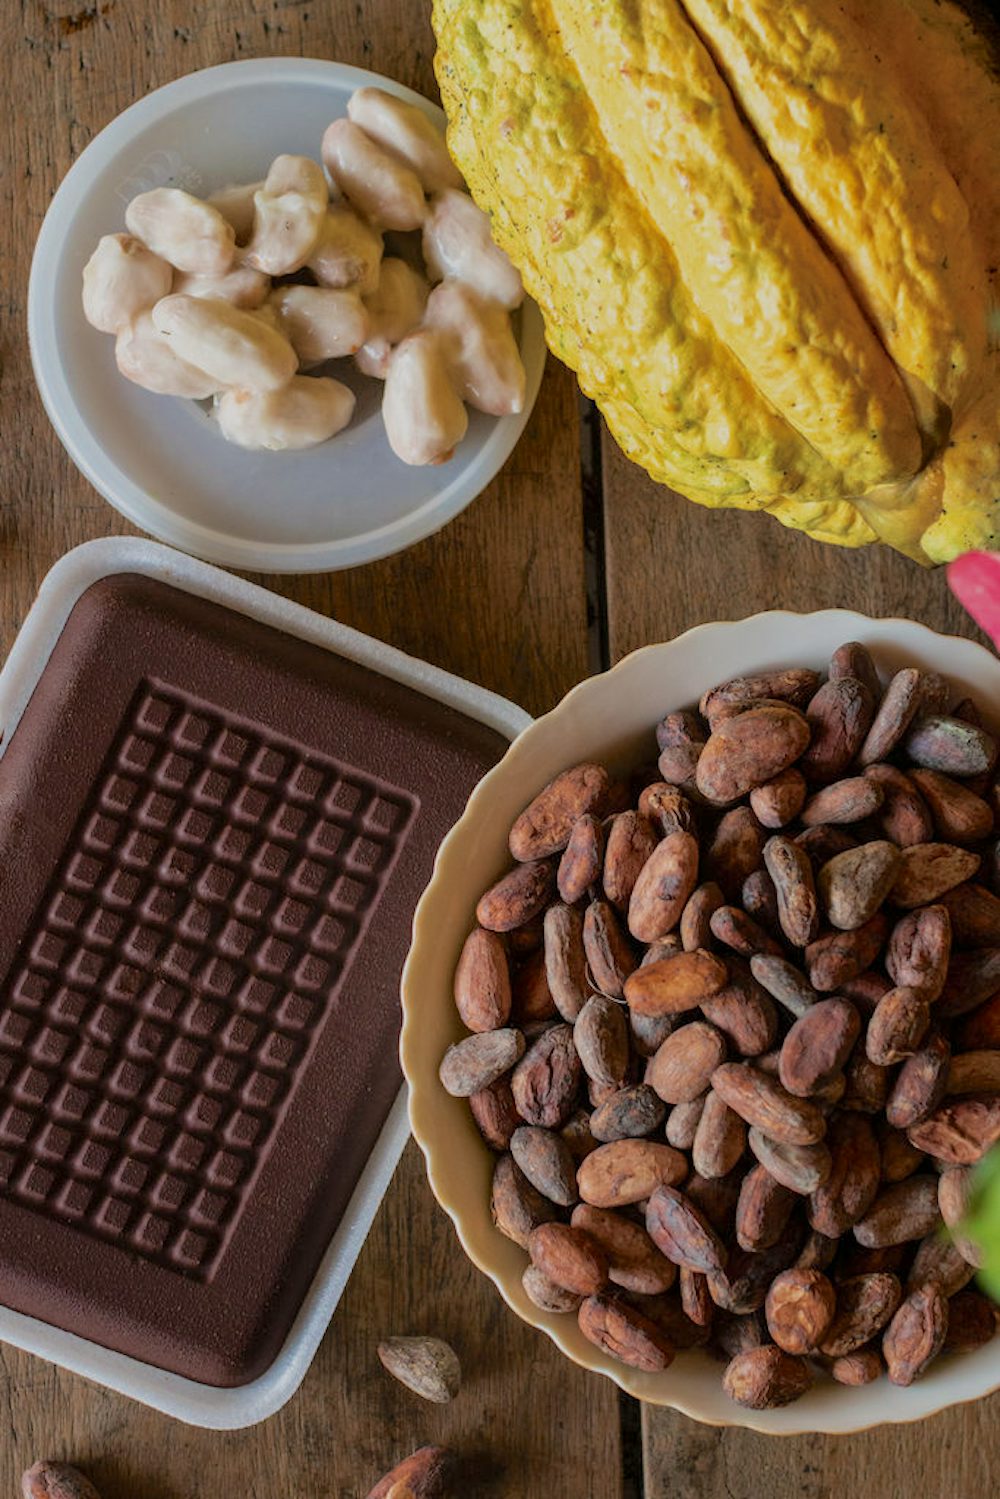 A yellow cacao pod, cacao beans covered in white fruit, roasted cacao beans and a finished chocolate bar gathered on a wood table.